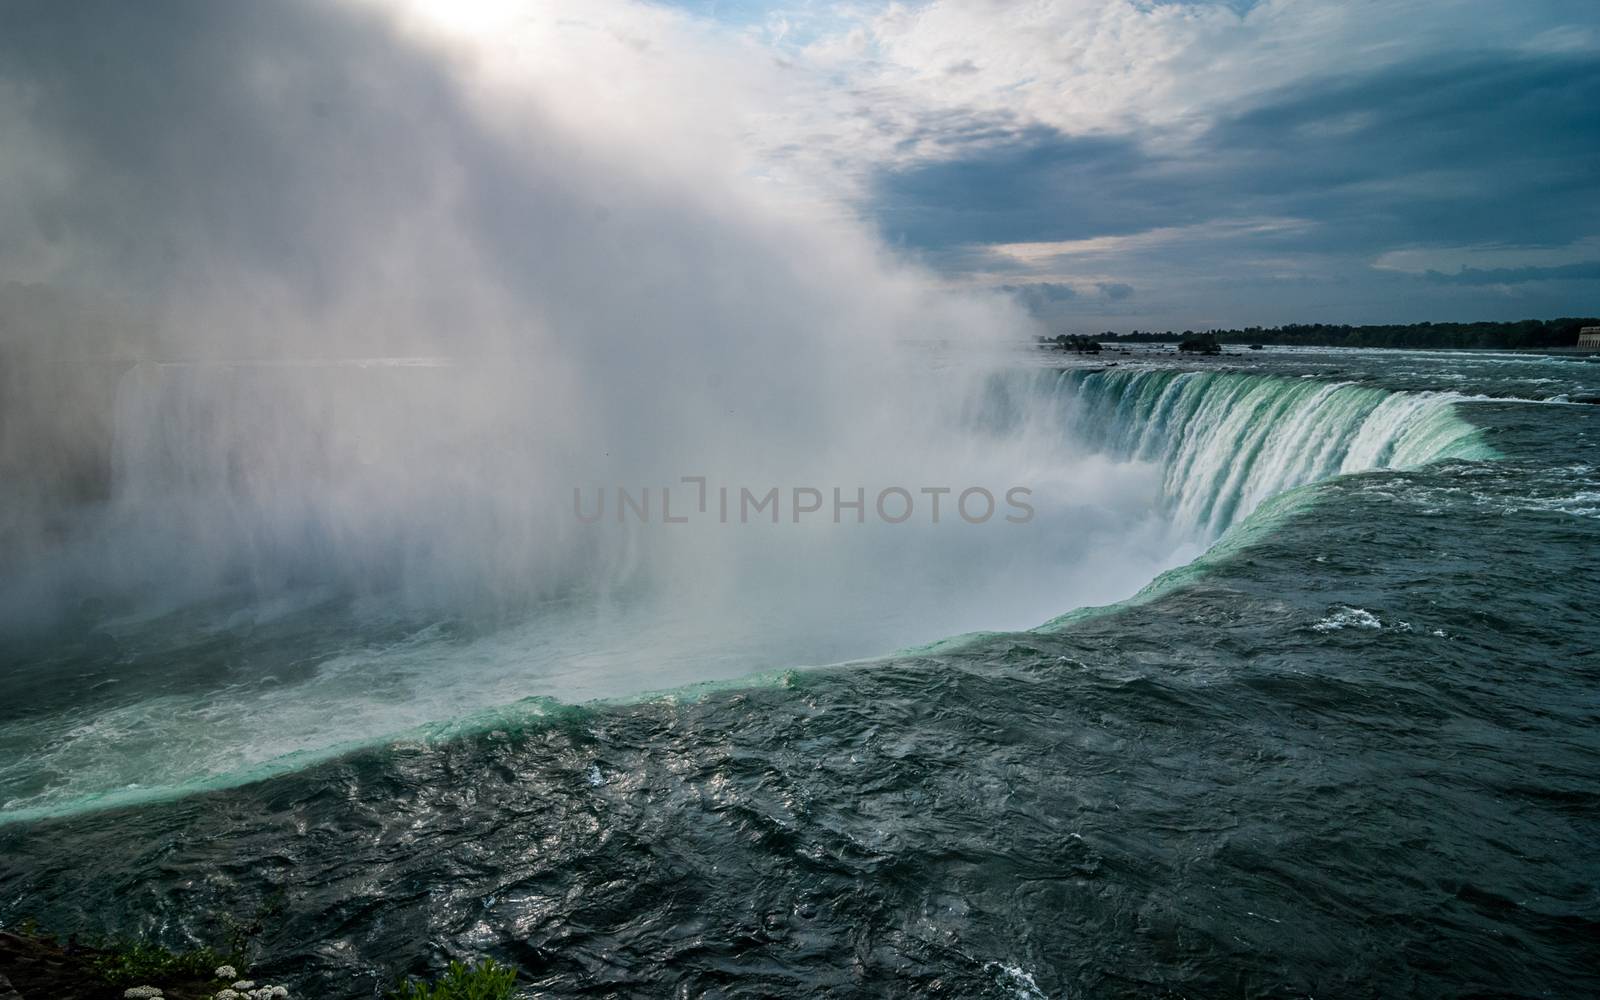 Views of the mighty Niagara River and Falls and those who would tour it, from the surrounding areas.